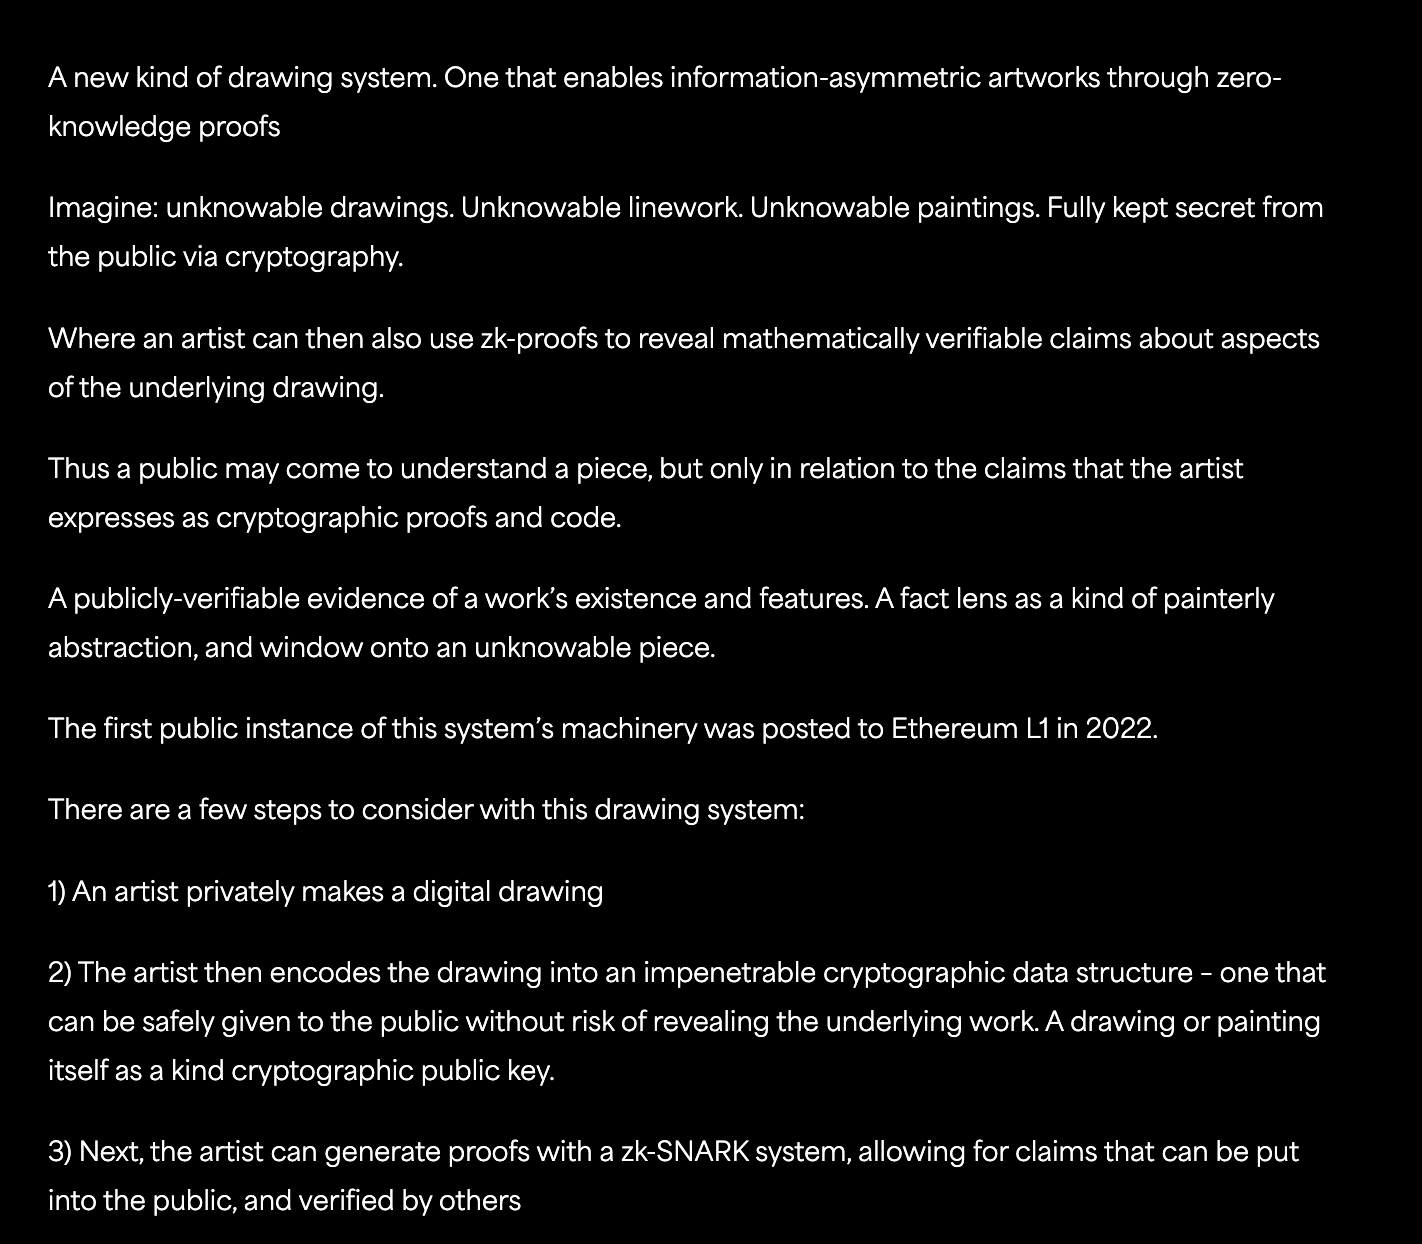 A list of descriptive and analytic statements about the possibility of verifying the existence of an unviewable artwork, written in white text on black